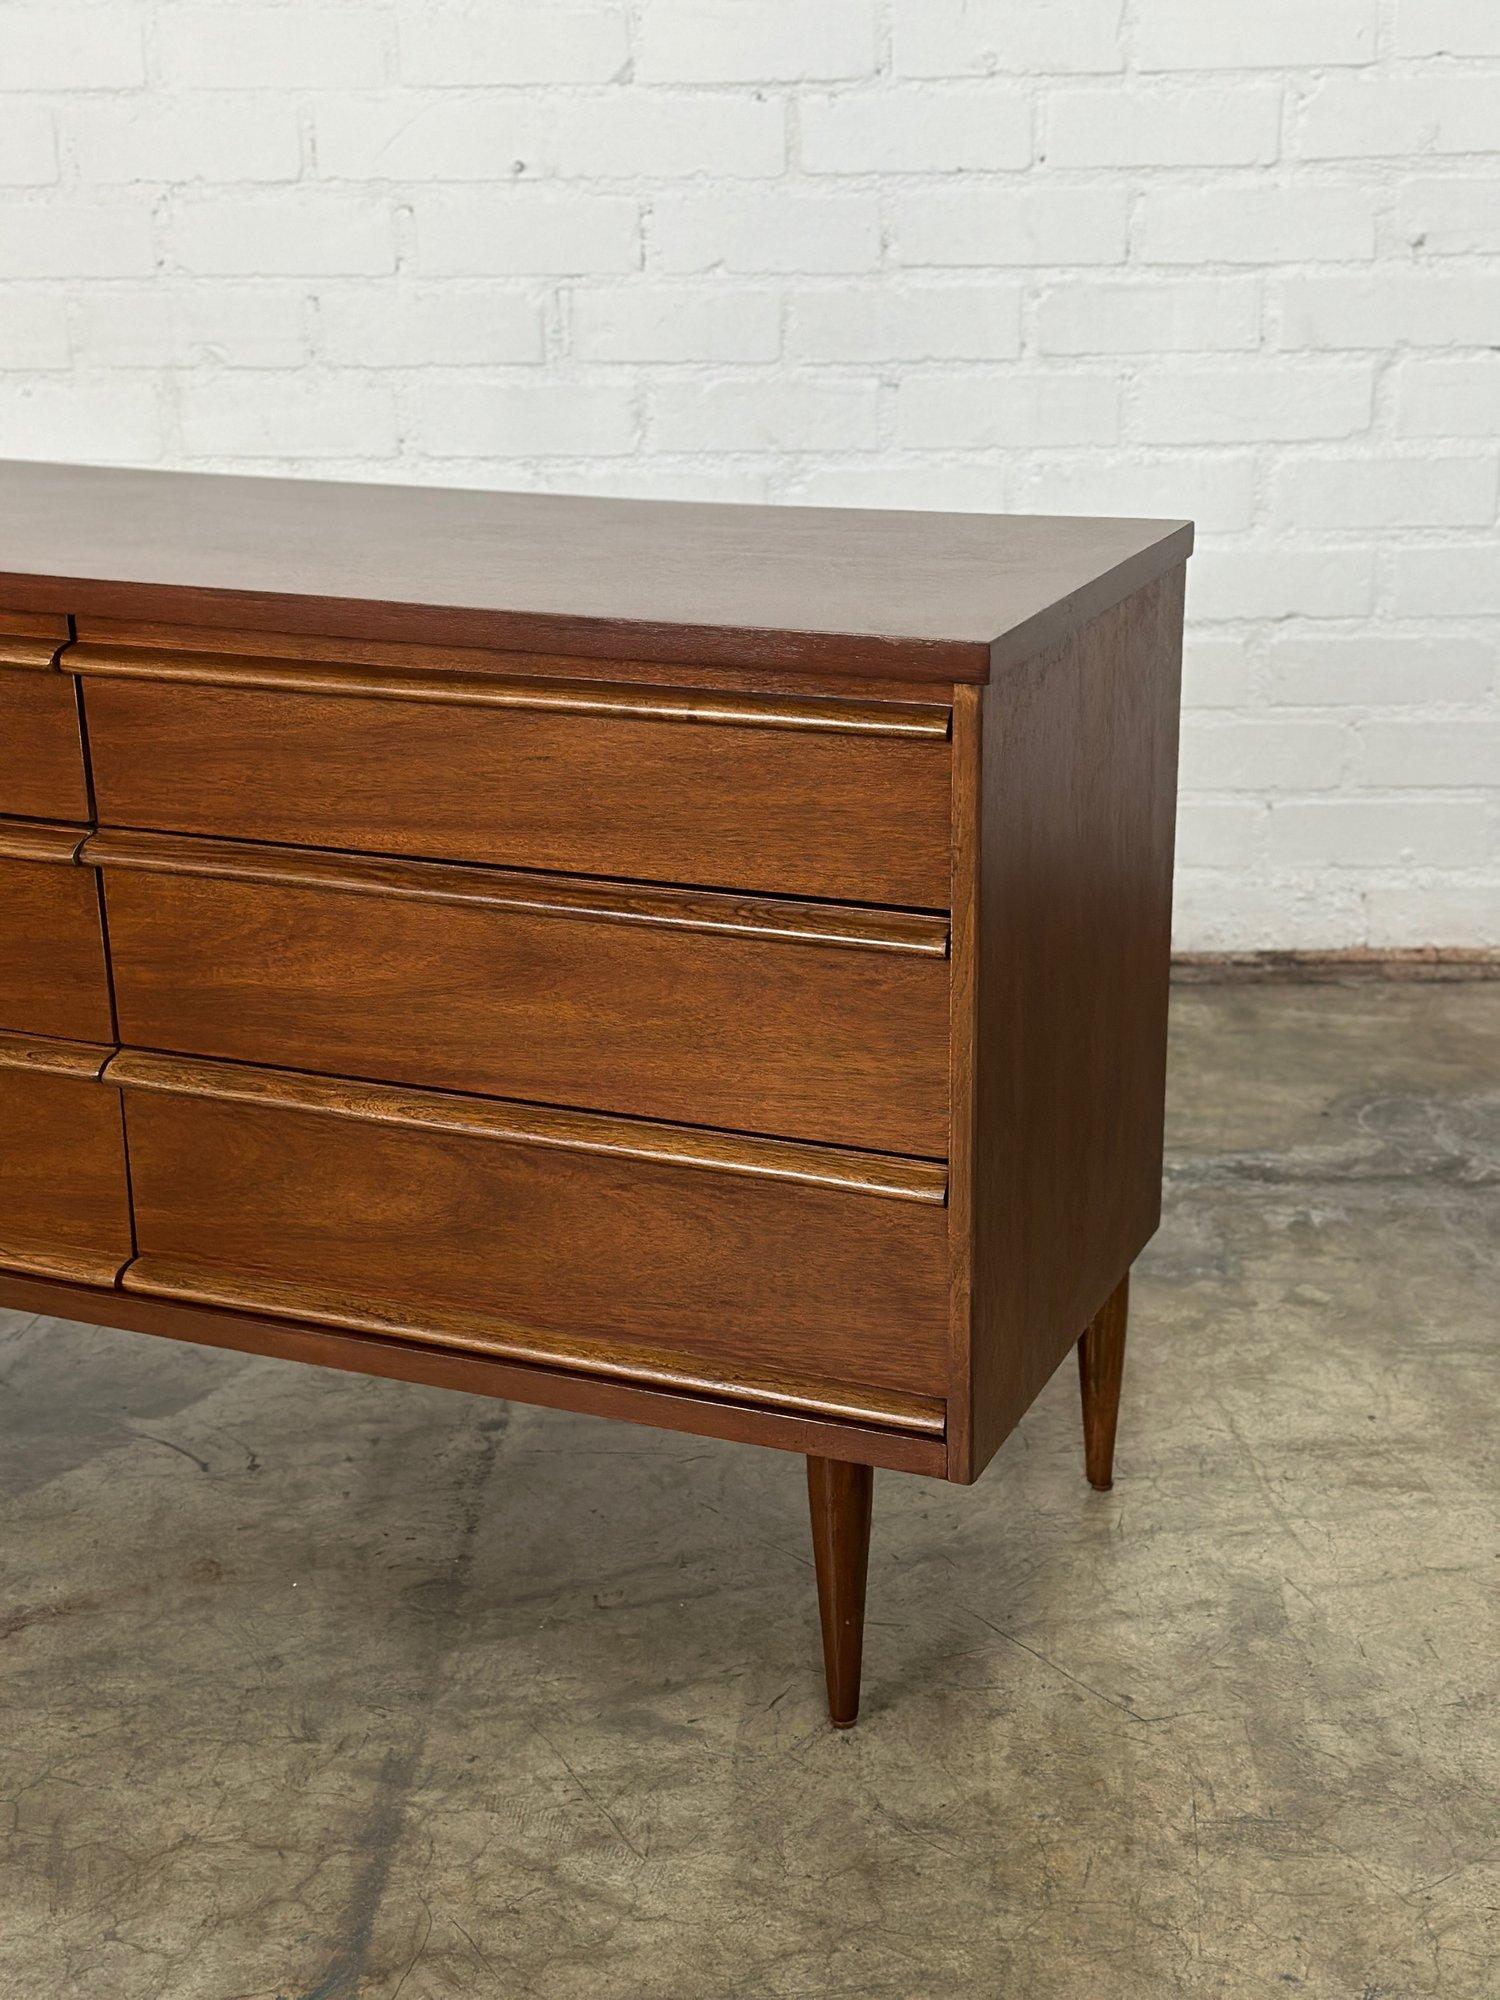 W52 D18 H30.5

Fully restored vintage dresser by Bassett. Item is structurally sound and sturdy with no major areas of wear. Dresser features sculpted solid wooden handles and manufacture stamp is well preserved. Drawers are clean and slide smoothly